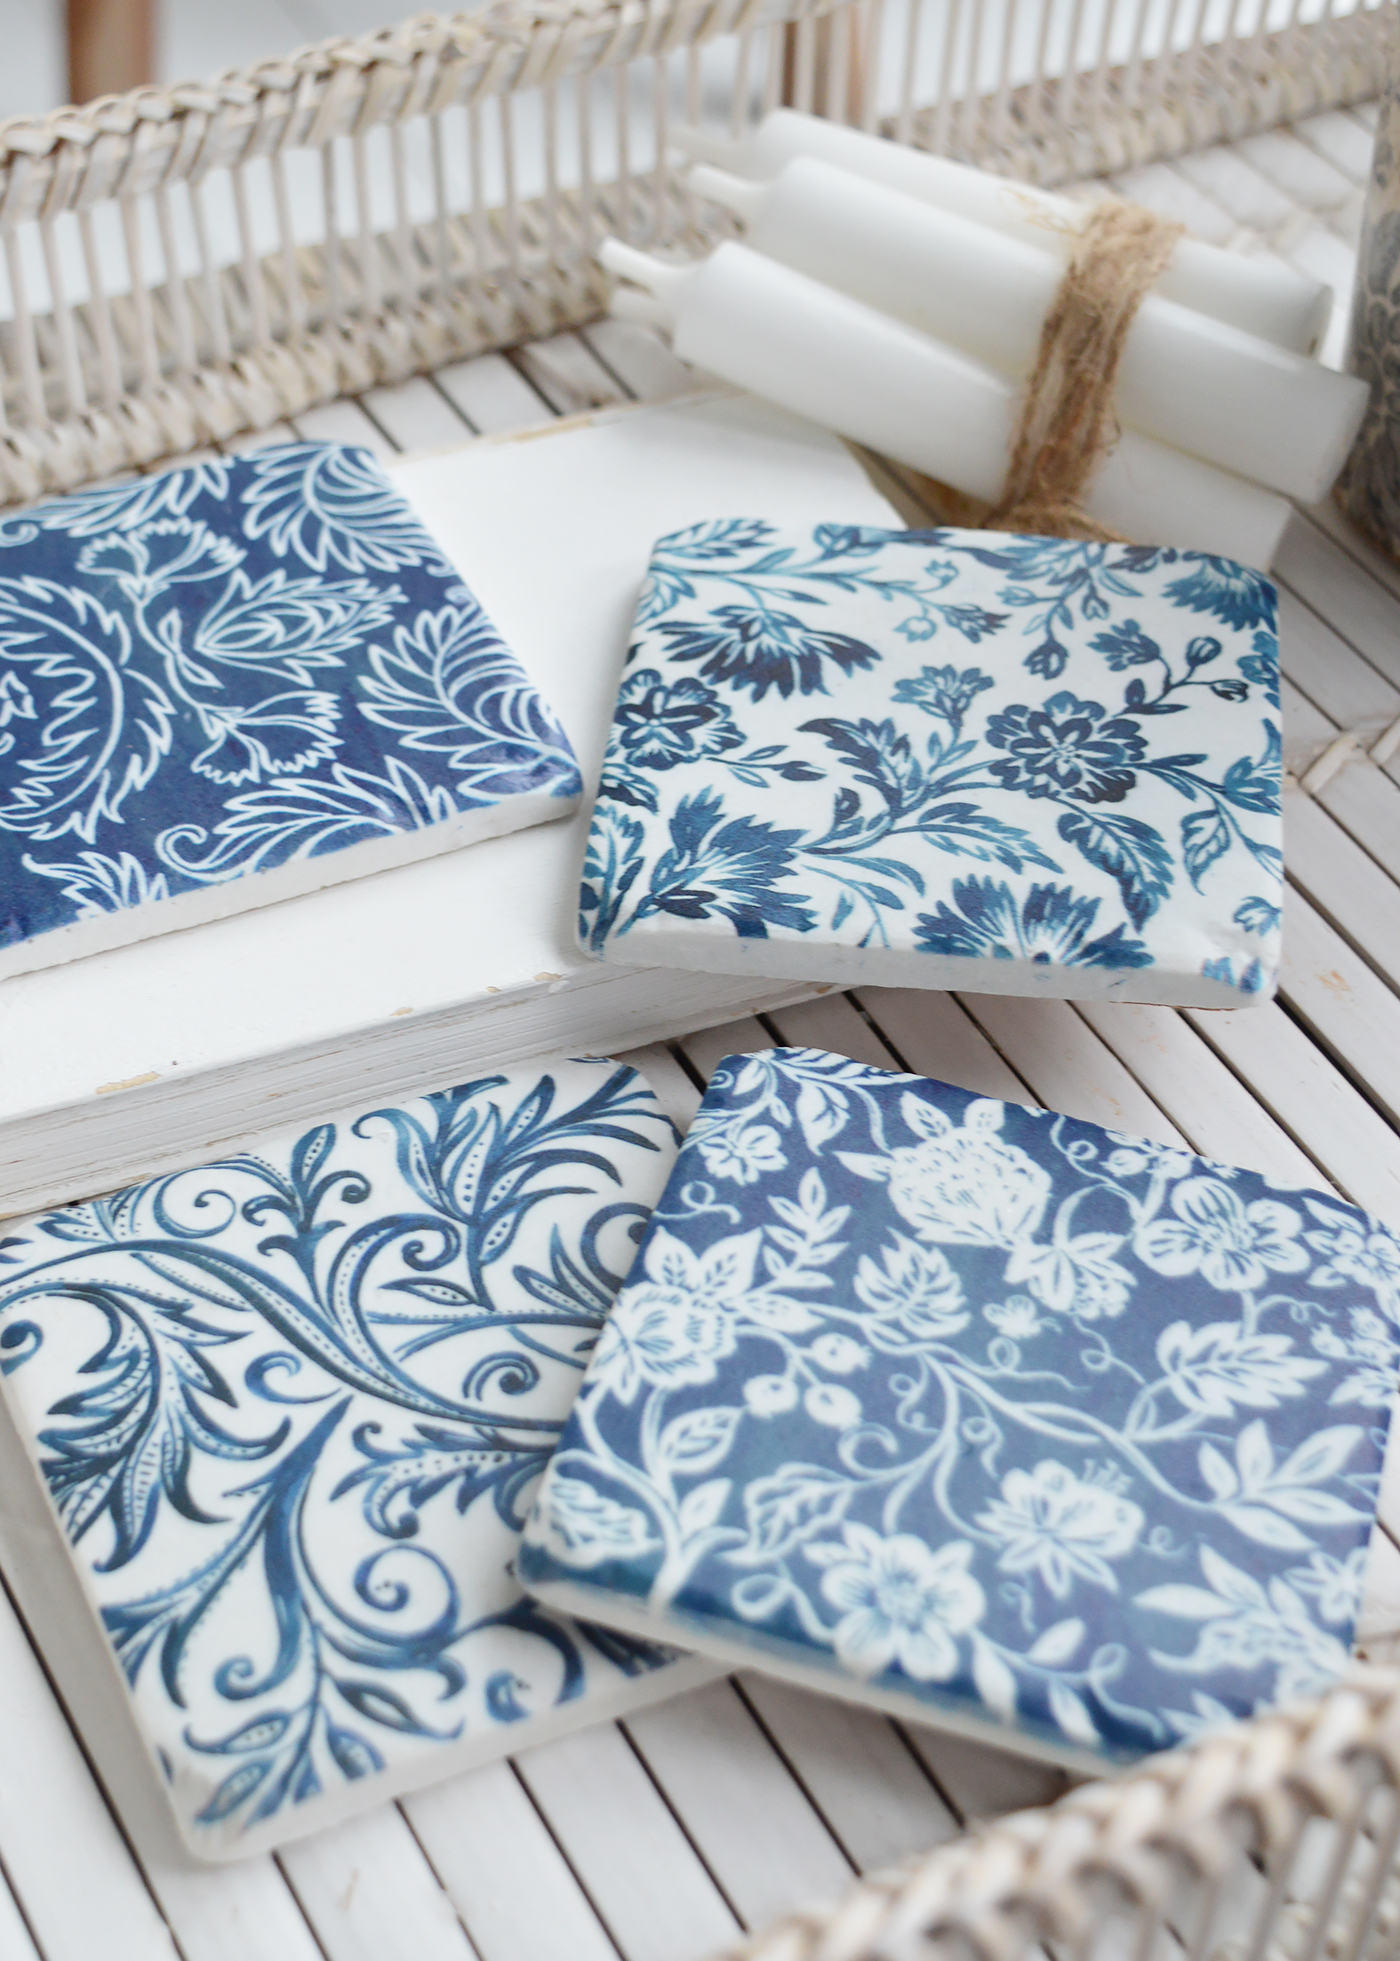 Blue and white floral coasters, perfect for both new England coastal and modern country and farmhouse homes and interiors